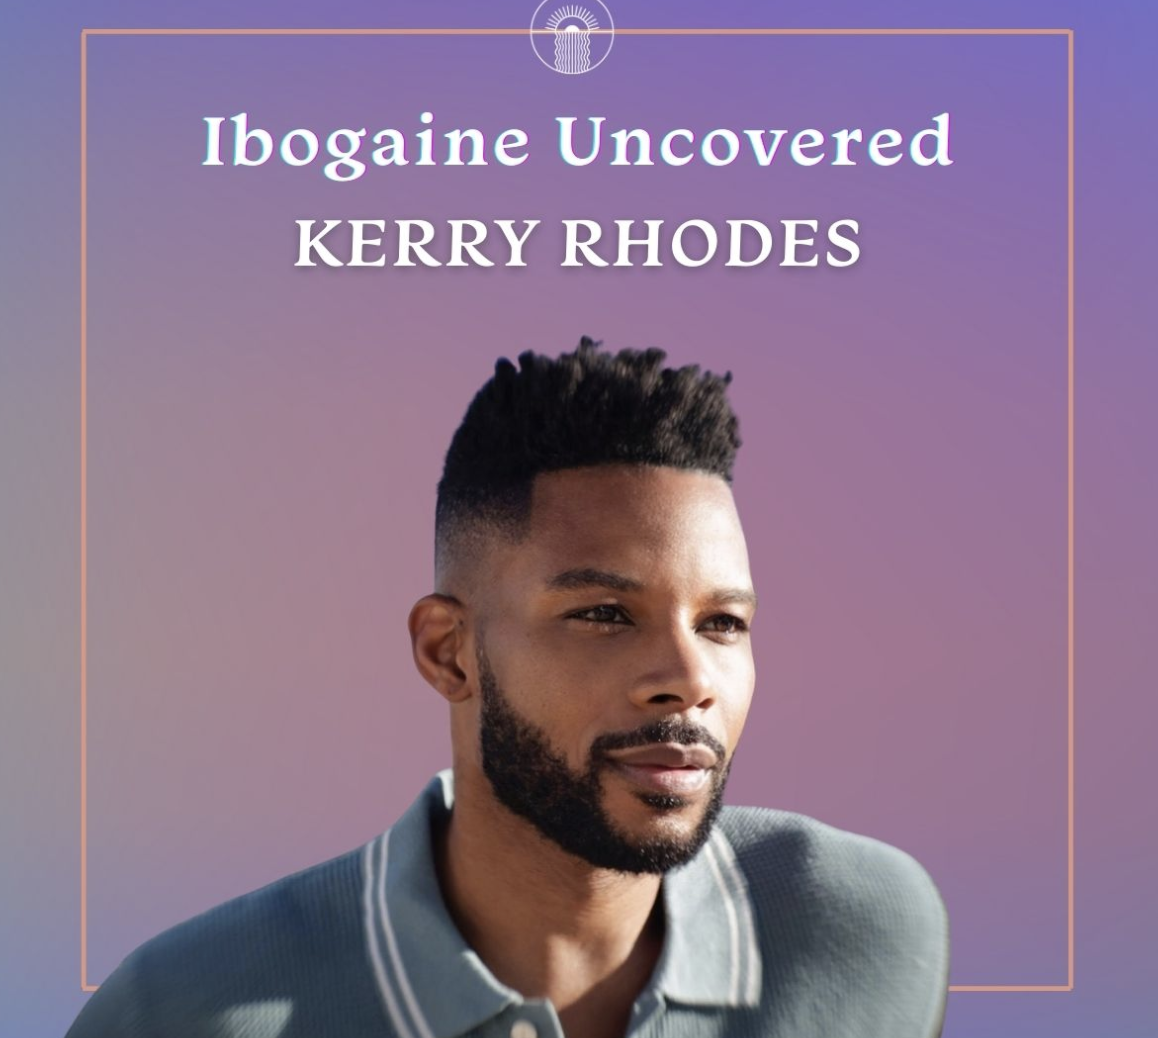 Kerry Rhodes - The Supporter's Role